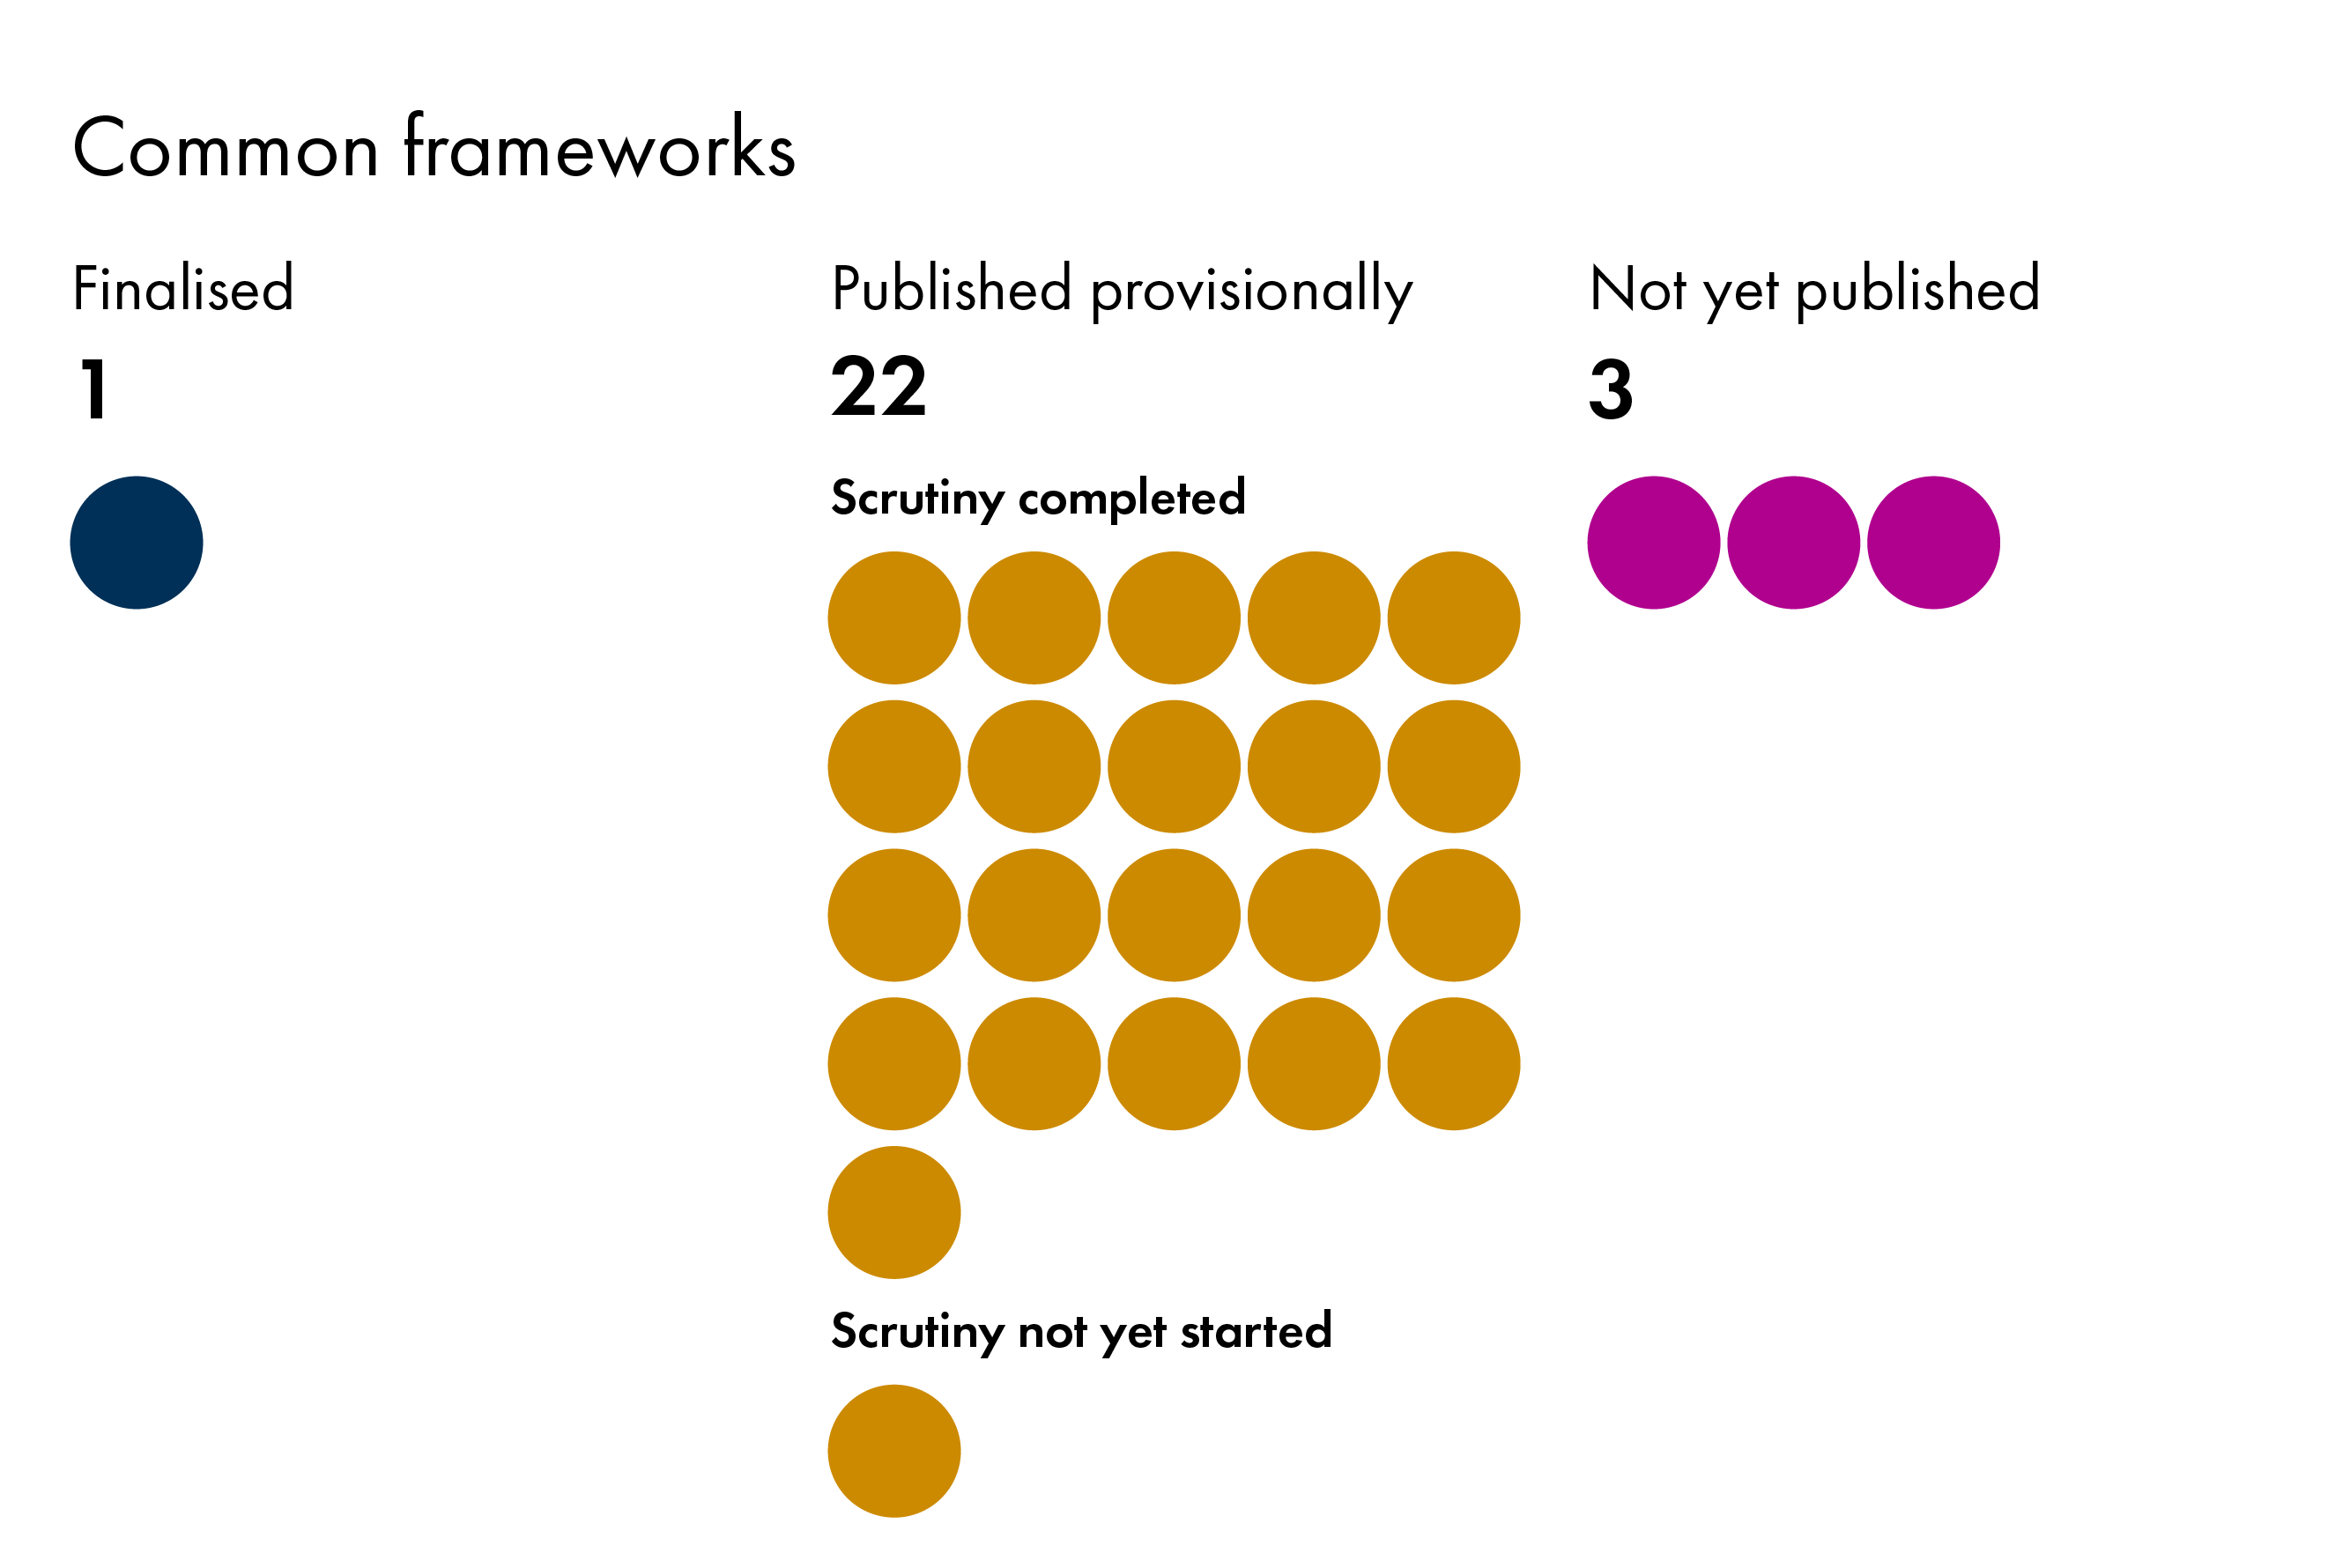 The infographic represents the number of common frameworks at different scrutiny stages. Under 'Finalised' there is one circle. Under 'Published provisionally' there are 22 circles: 13 under 'Scrutiny completed', seven under 'Scrutiny in progress', and two under 'Scrutiny not yet started'. Under 'Not yet published' there are three circles.